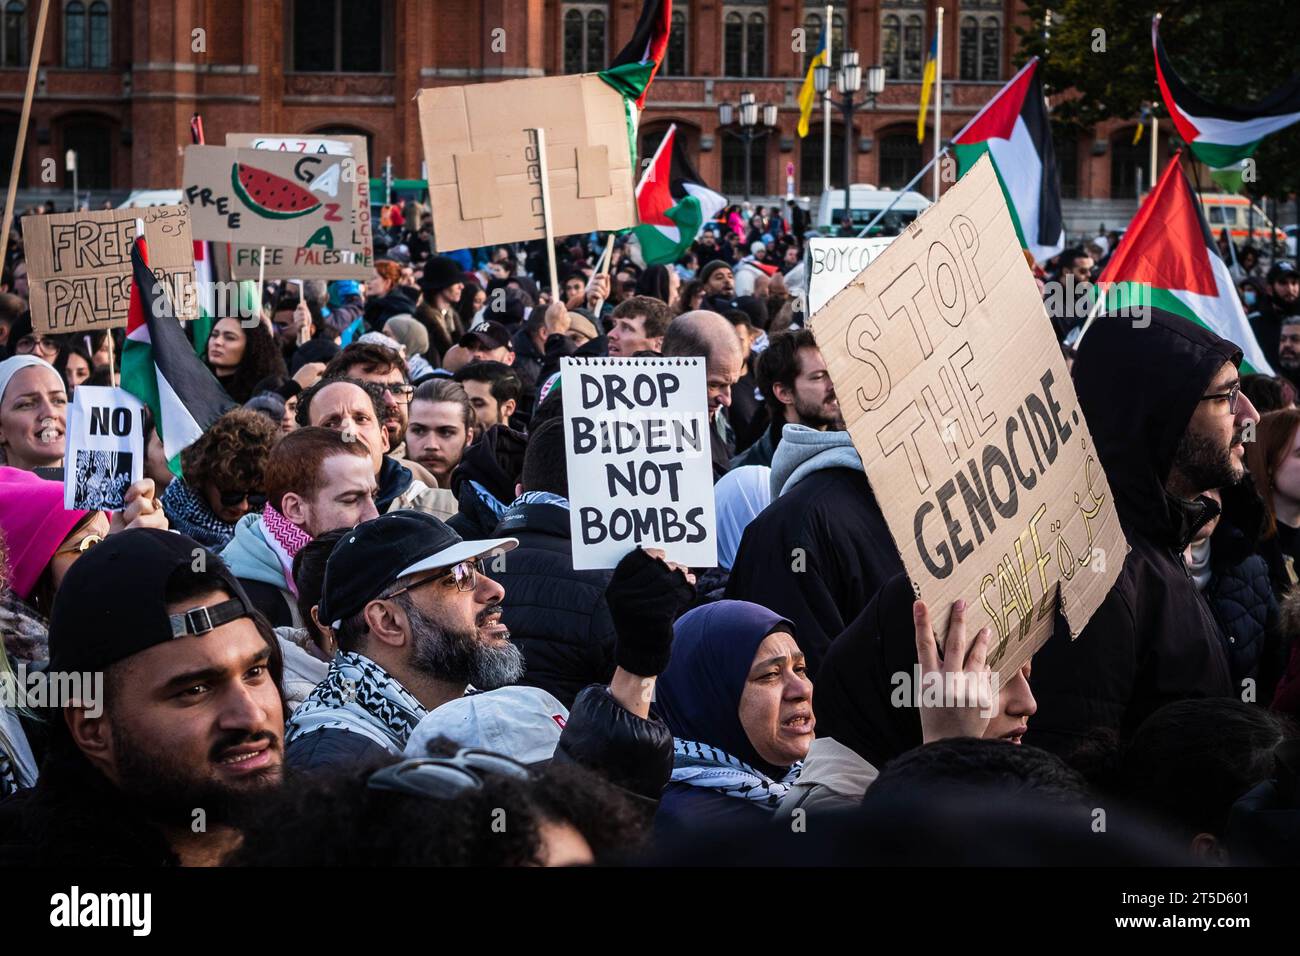 Berlin, Germany - November, 4: People with palestinian flags and sign on Free Palestine Demonstration in Berlin Stock Photo